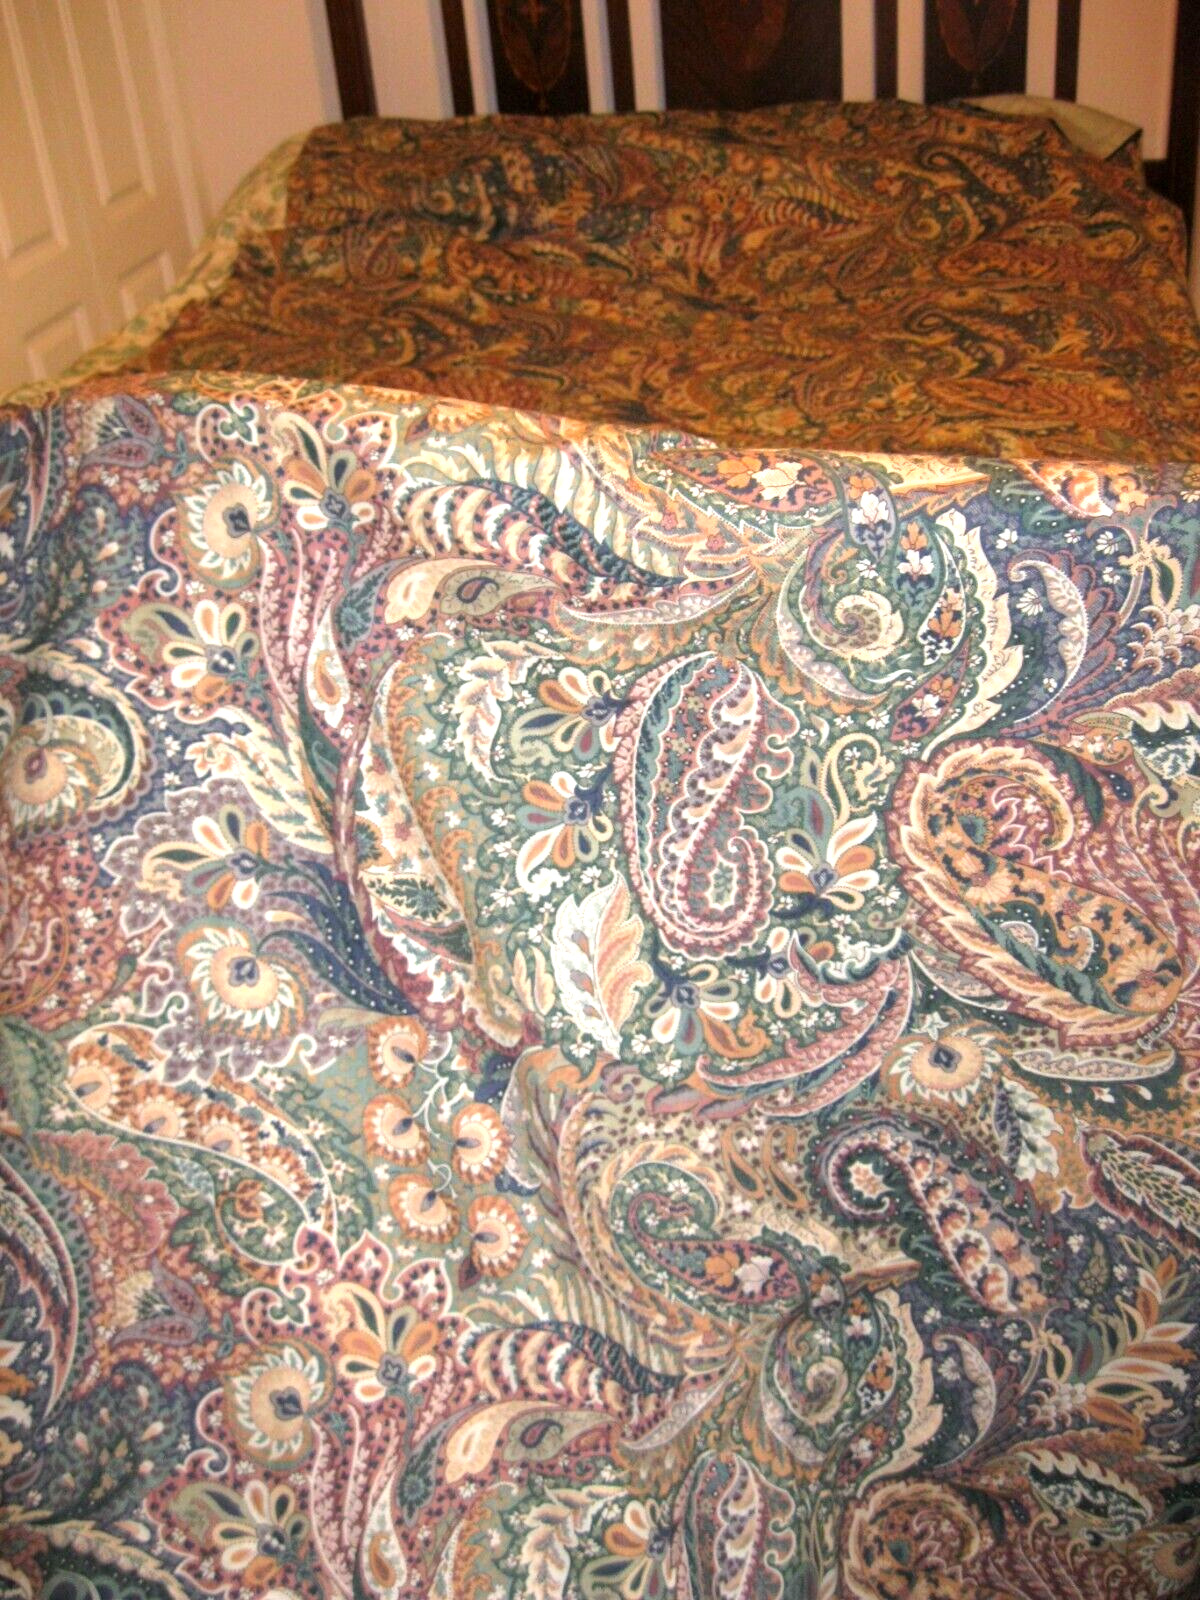 Very large bespoke cotton lined paisley pattern panel 625x132cms .Over6.5 metres